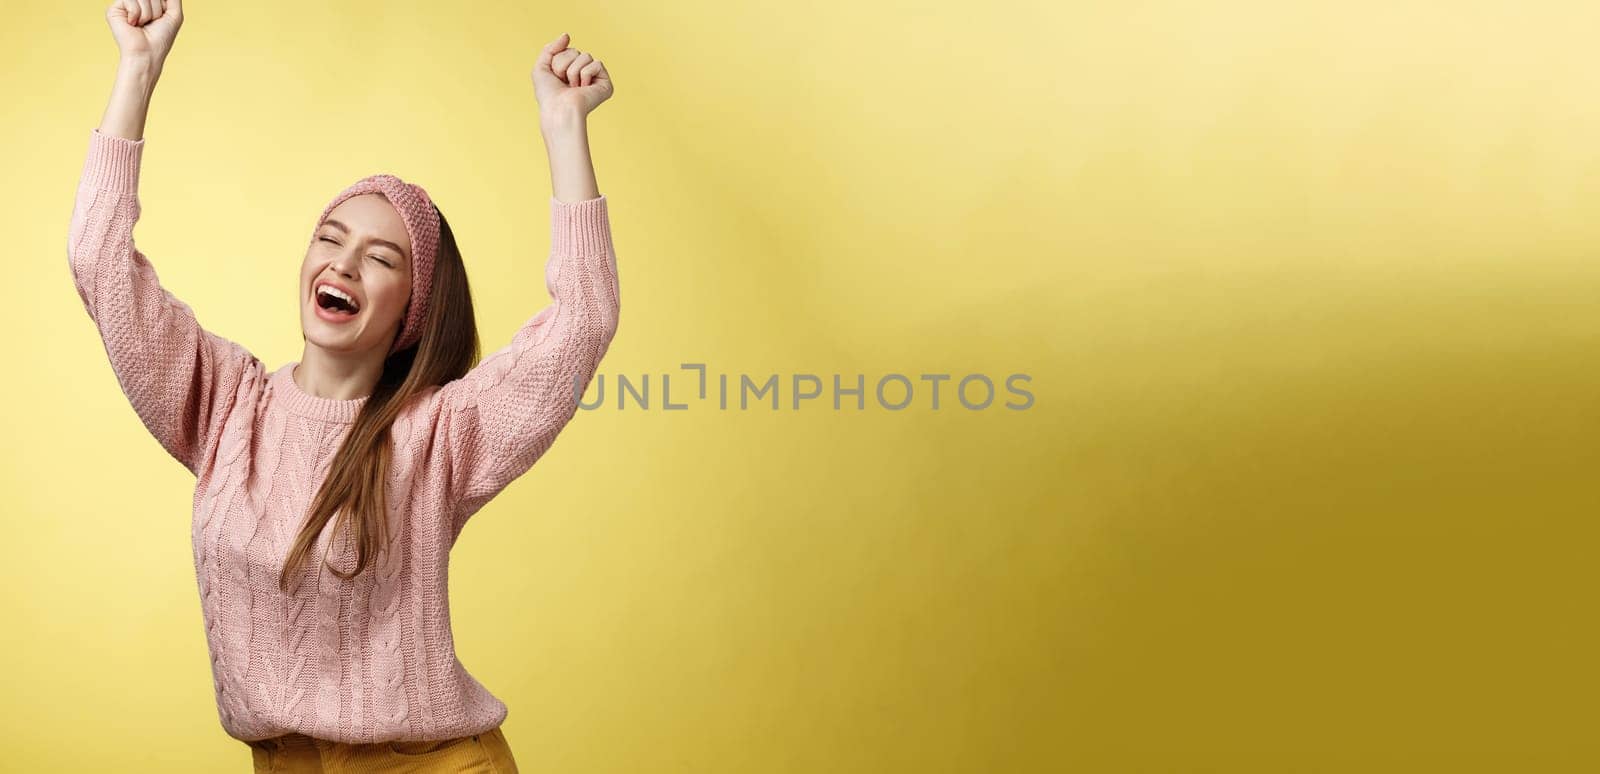 Positive celebating happy european young woman wearing casual sweater yelling happily shouting yes, triumphing racing hands up in success jumping ecstatic rejoicing cheerfully over success. Copy space